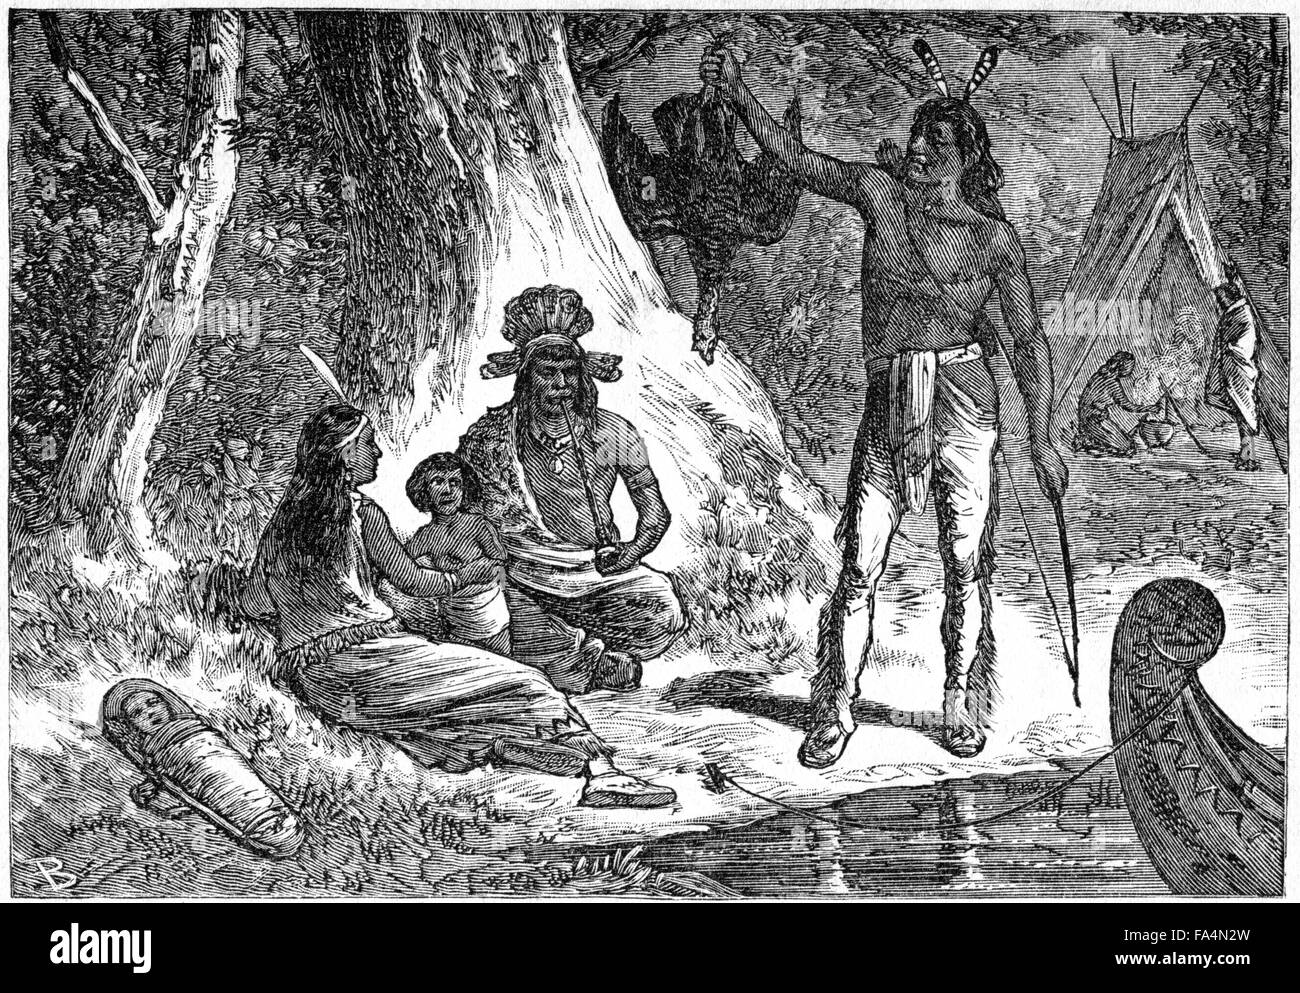 “Indian Life in Their Native Forests”, Book Illustration from “Indian Horrors or Massacres of the Red Men”, by Henry Davenport Northrop, 1891 Stock Photo